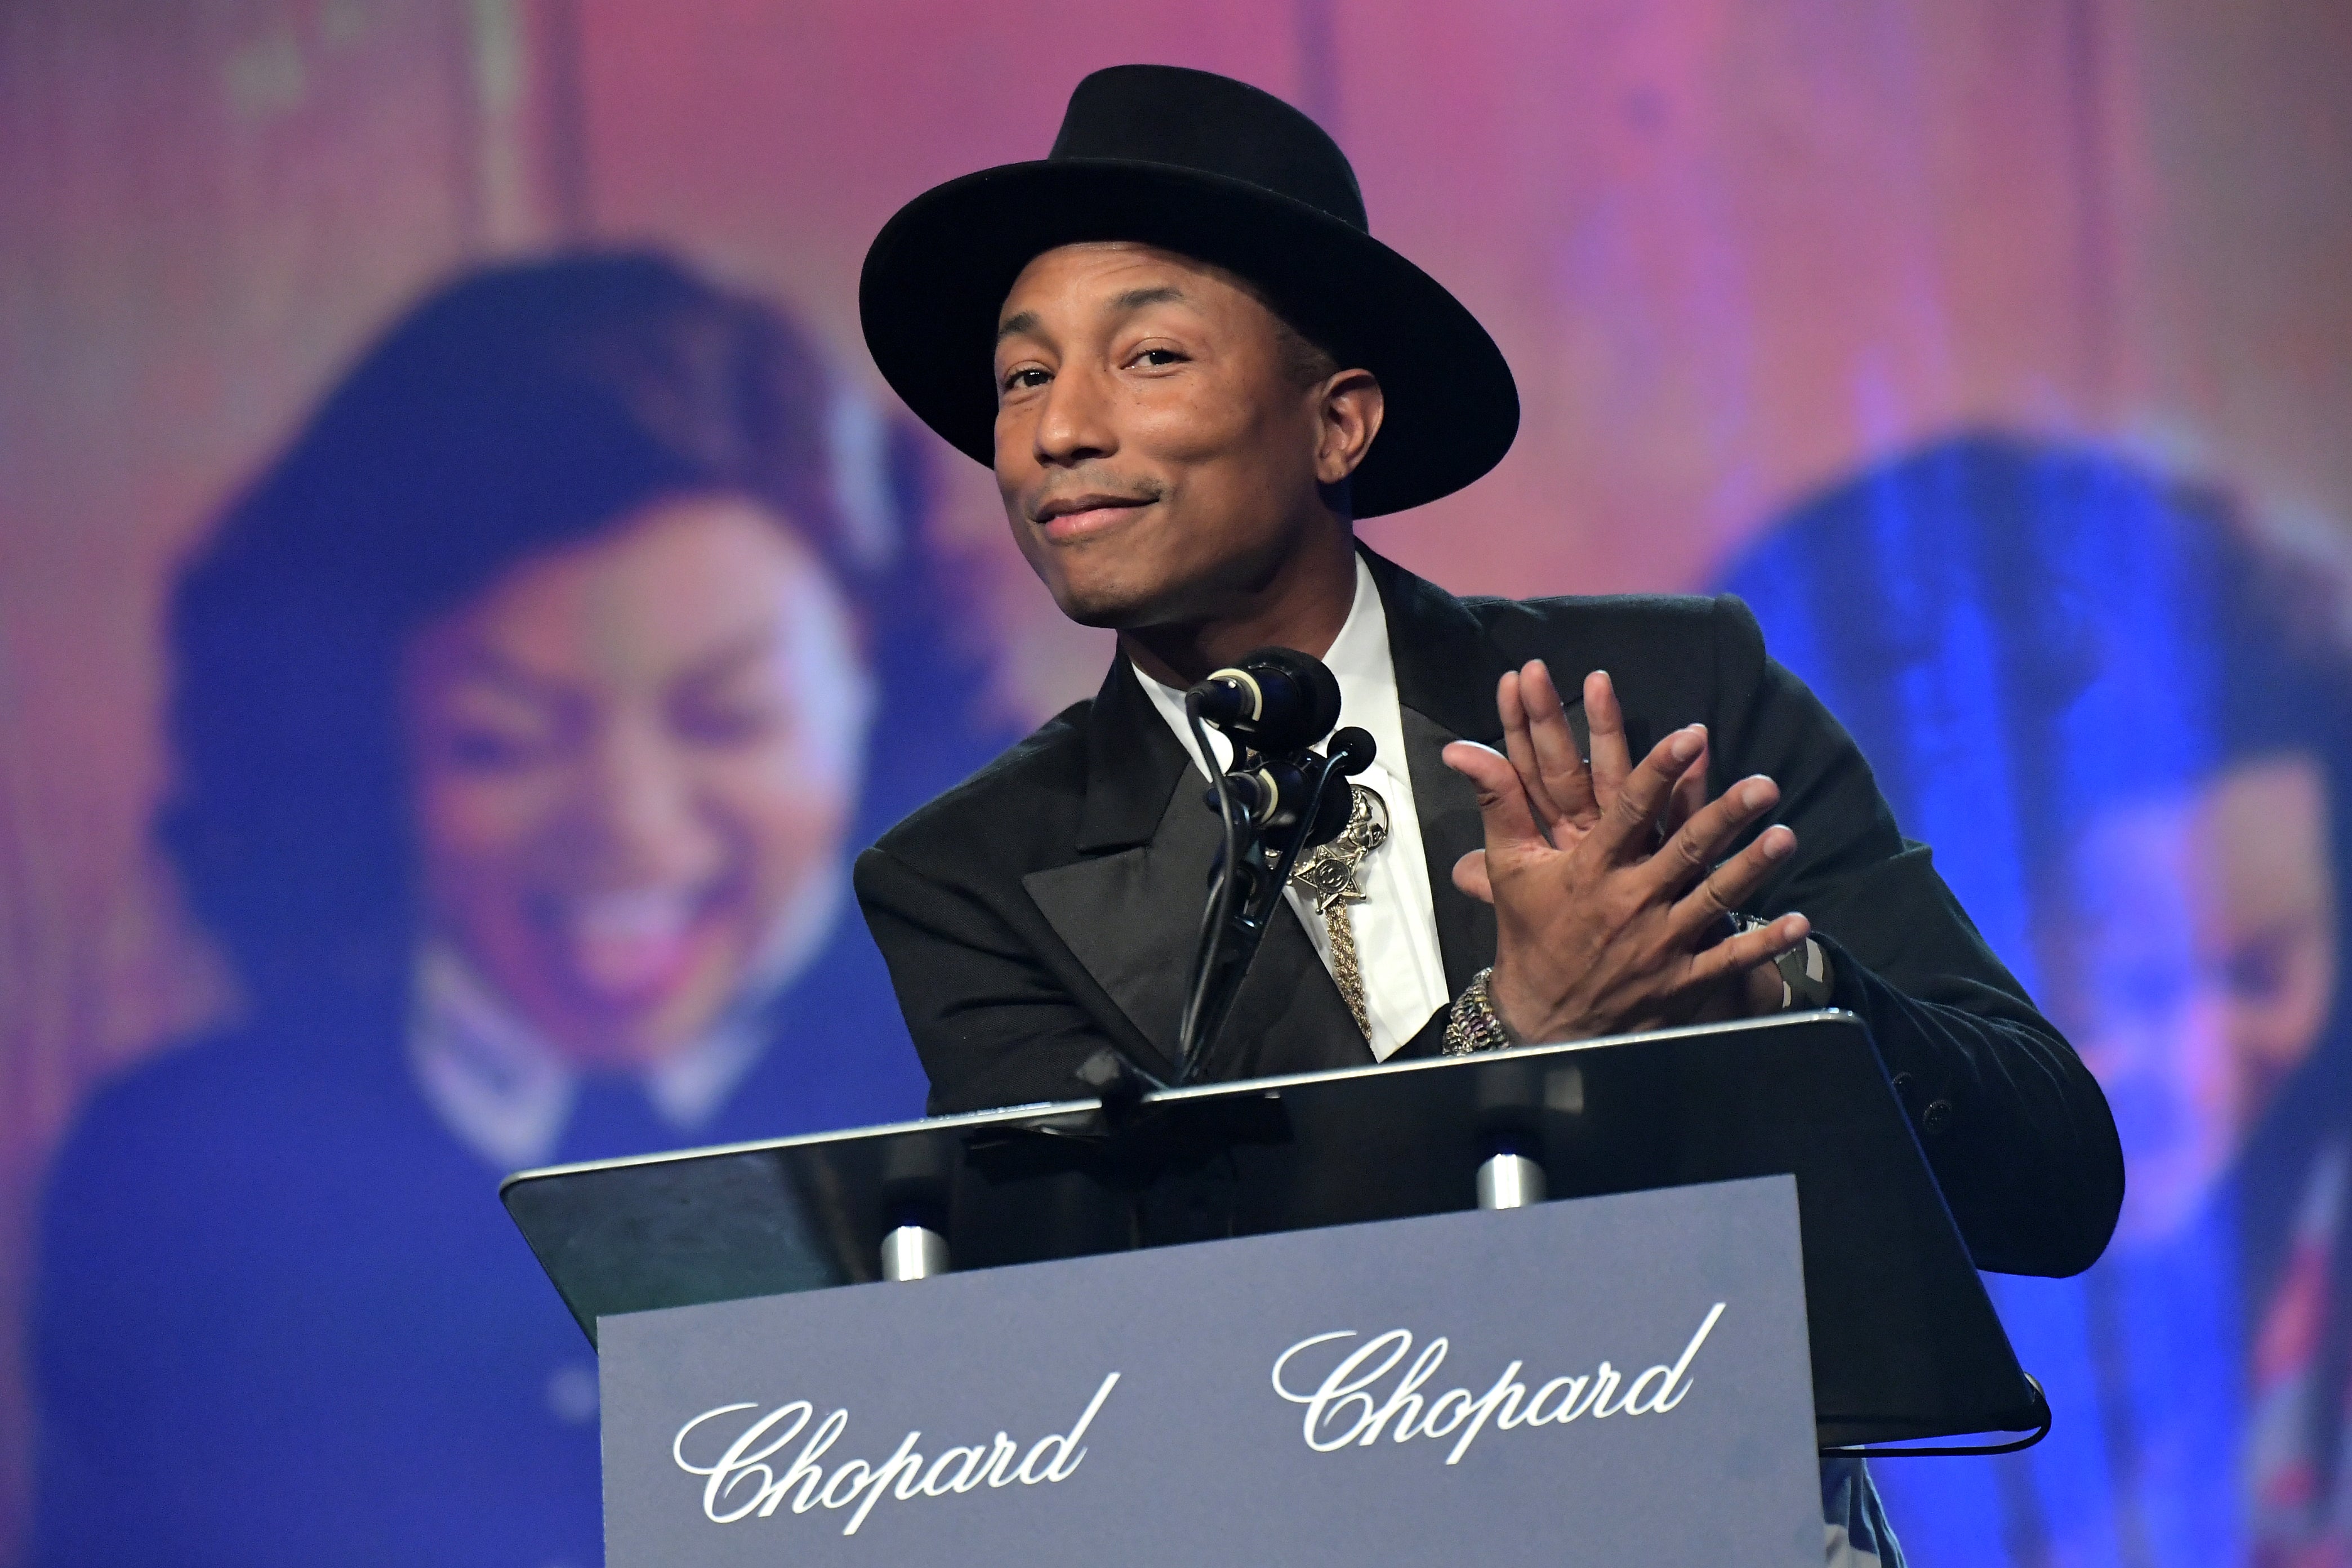 Pharrell Williams Reveals the Skin Care Routine That Helps Him Look Eternally Young